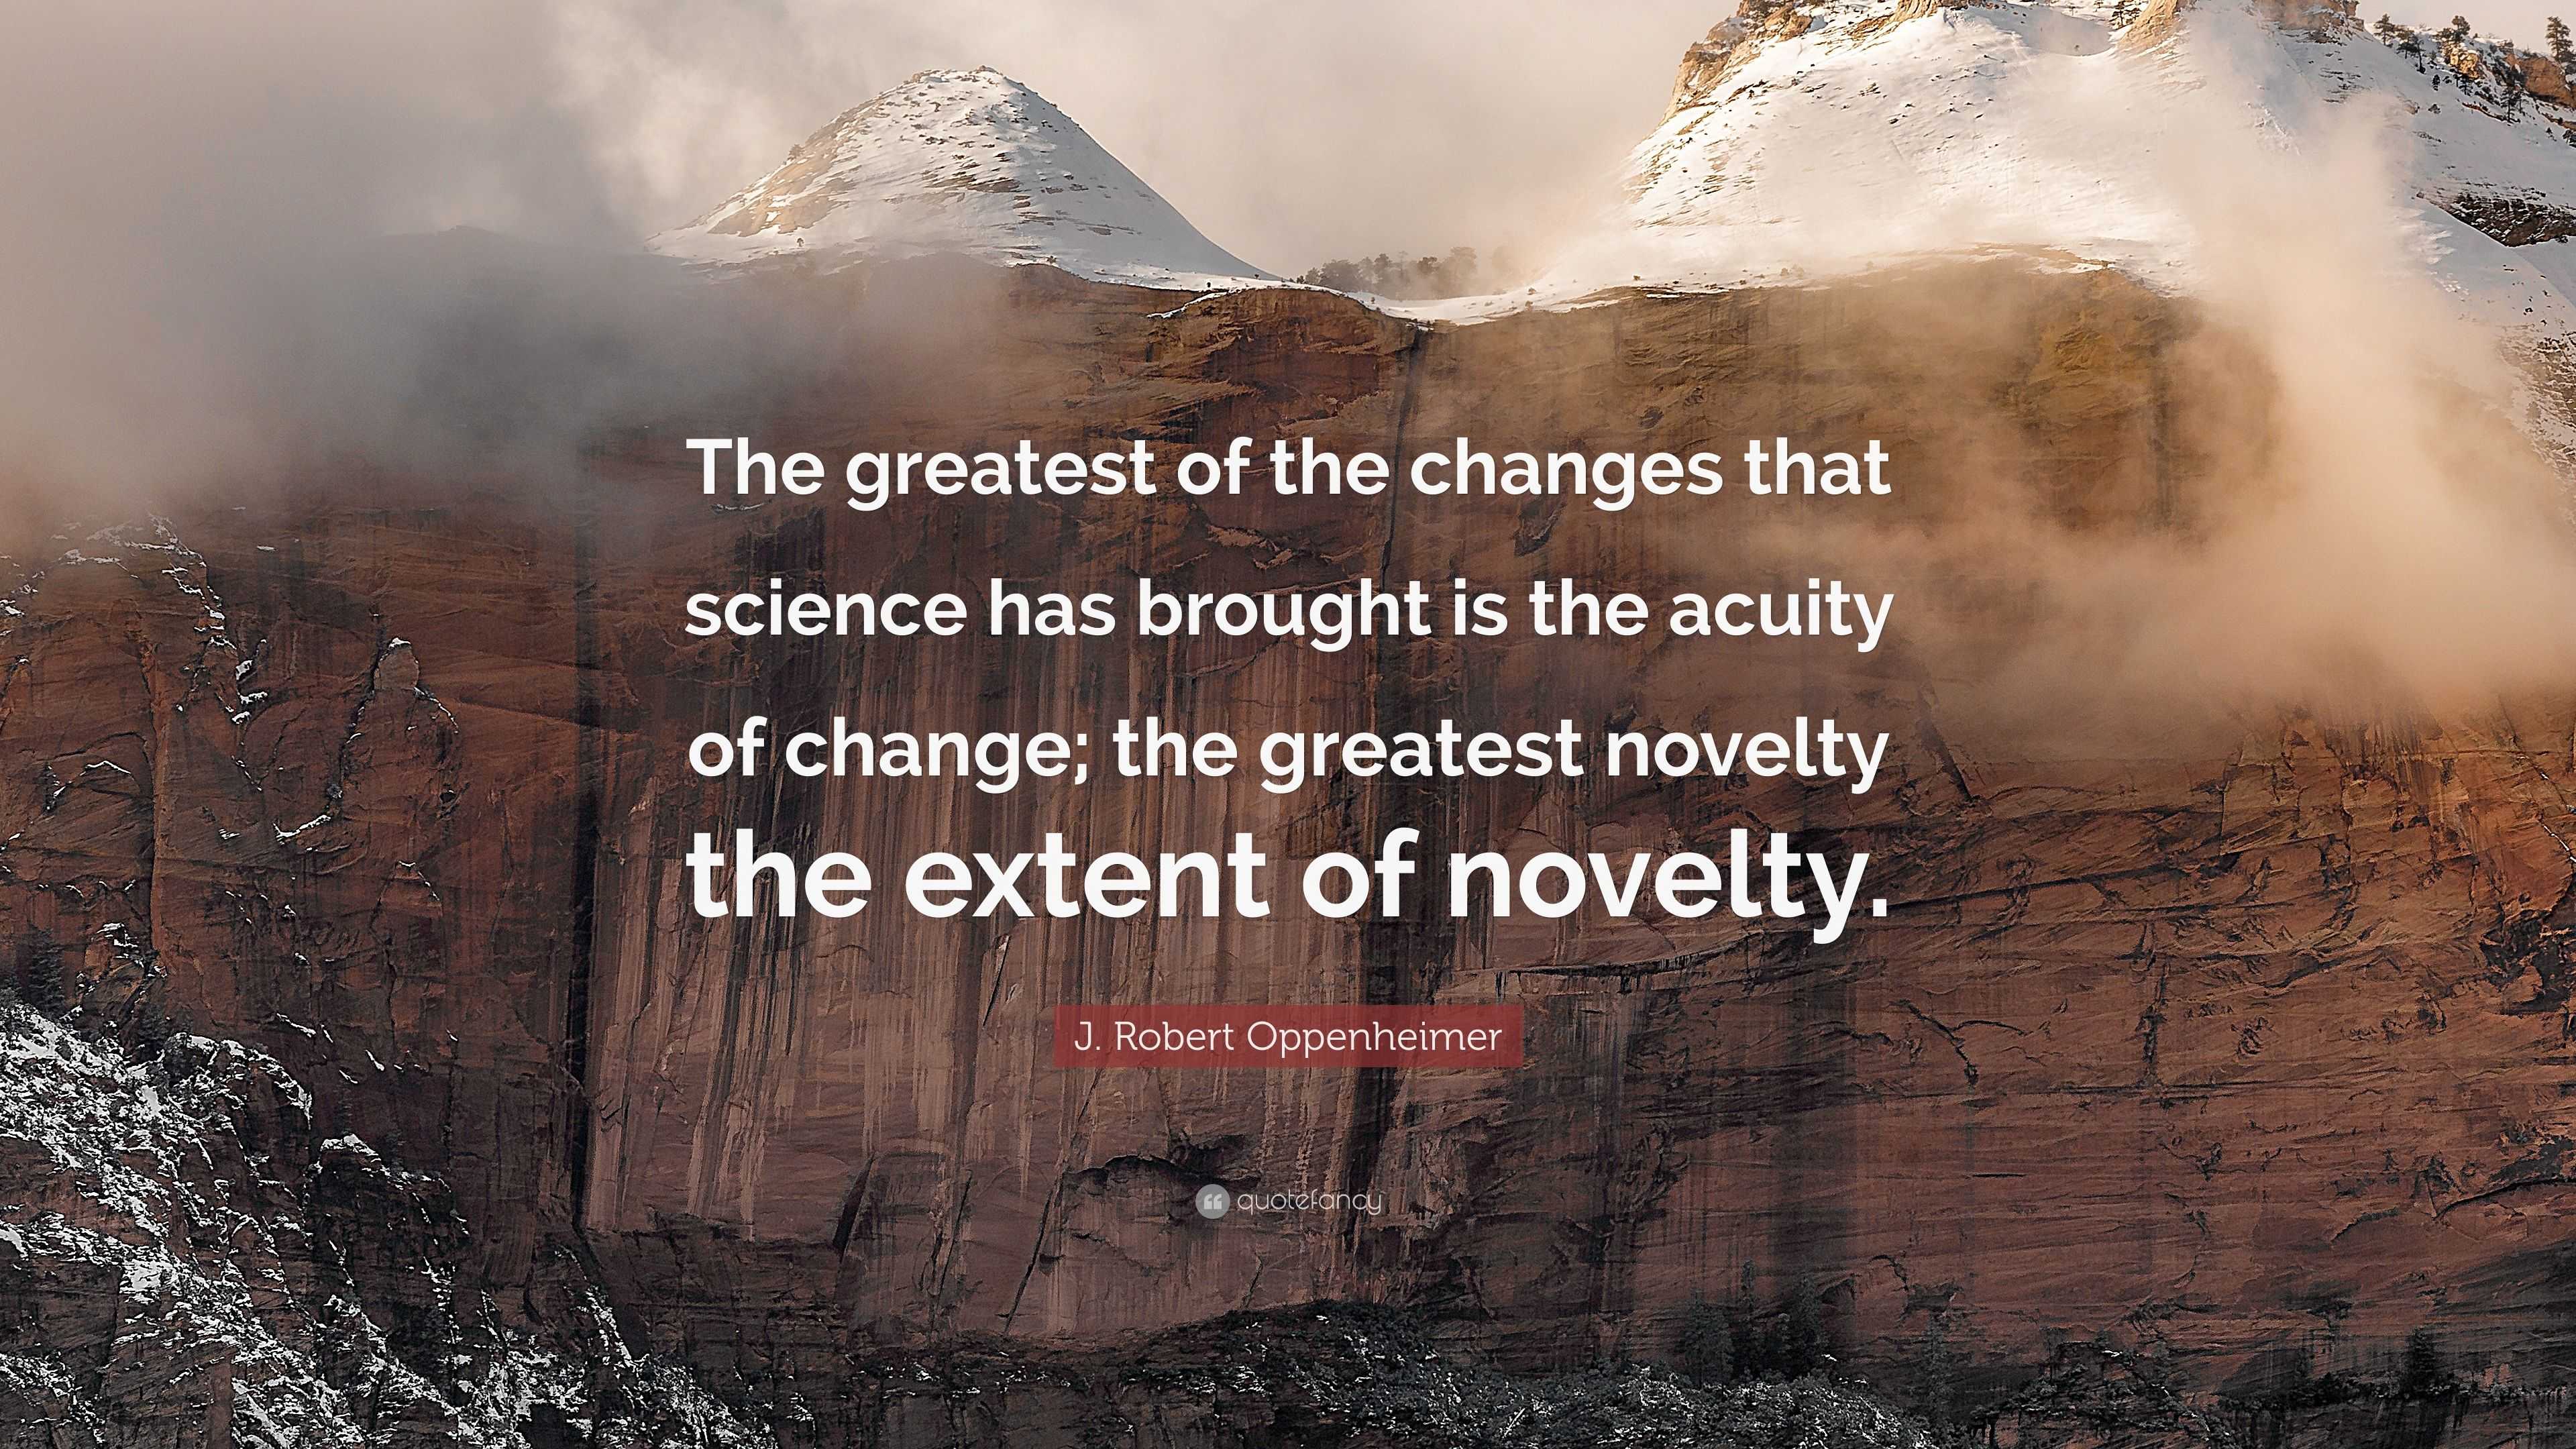 J. Robert Oppenheimer Quote: “The greatest of the changes that science has  brought is the acuity of change; the greatest novelty the extent of  novelty...”